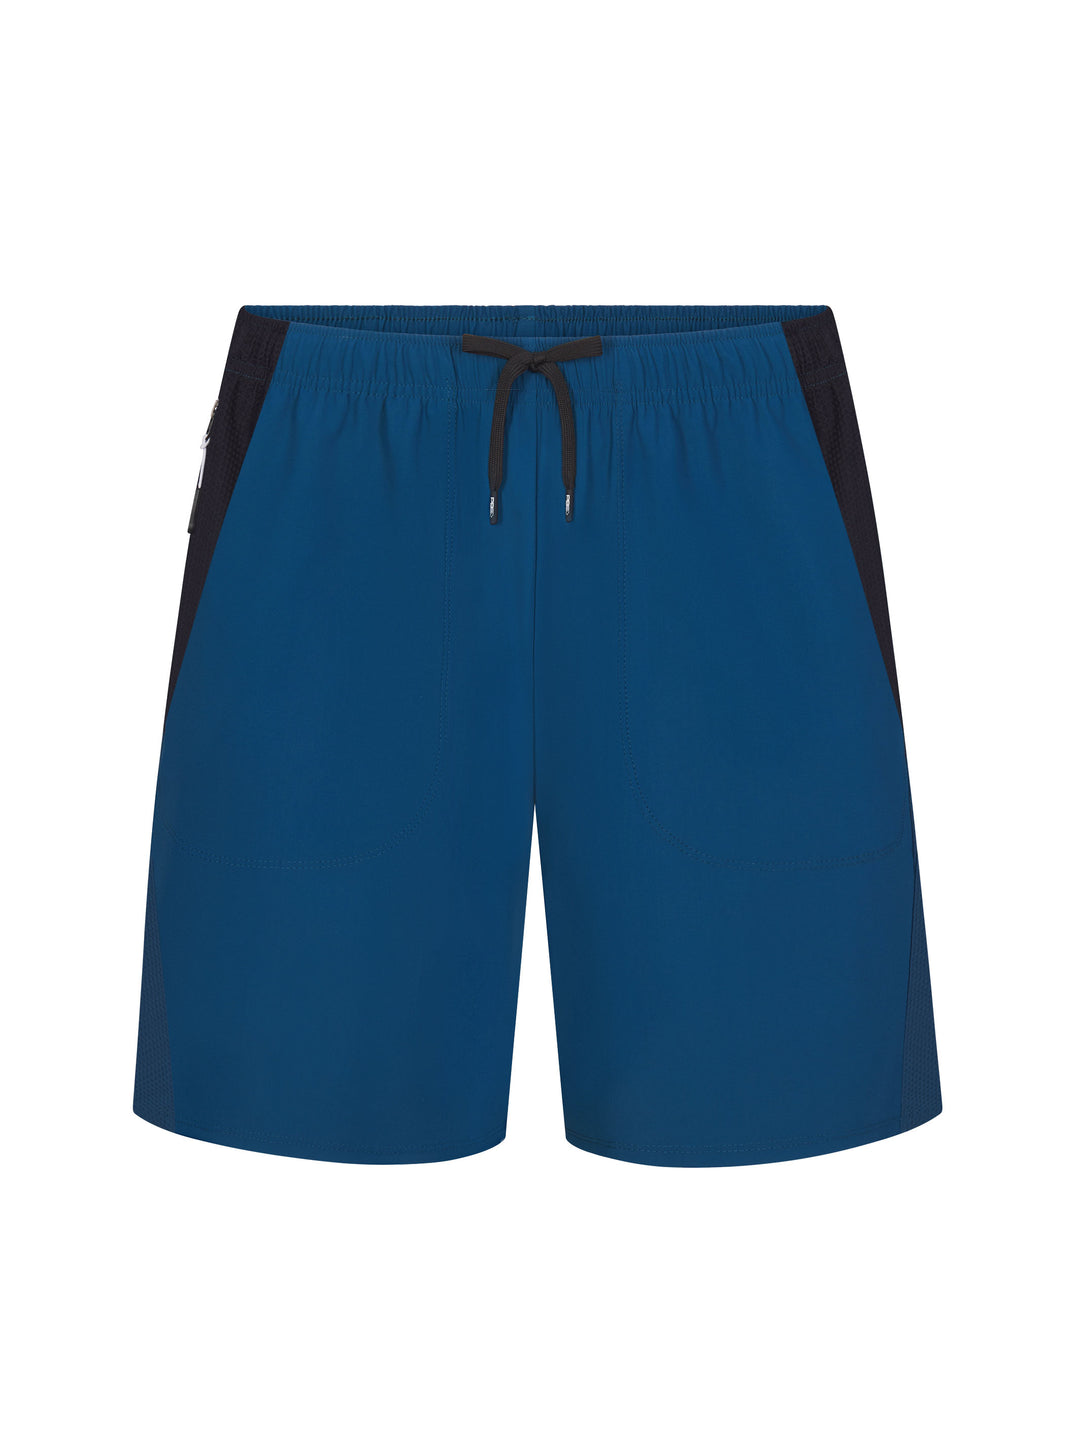 Men's Vented Court Short front view in astral blue with black draw string.